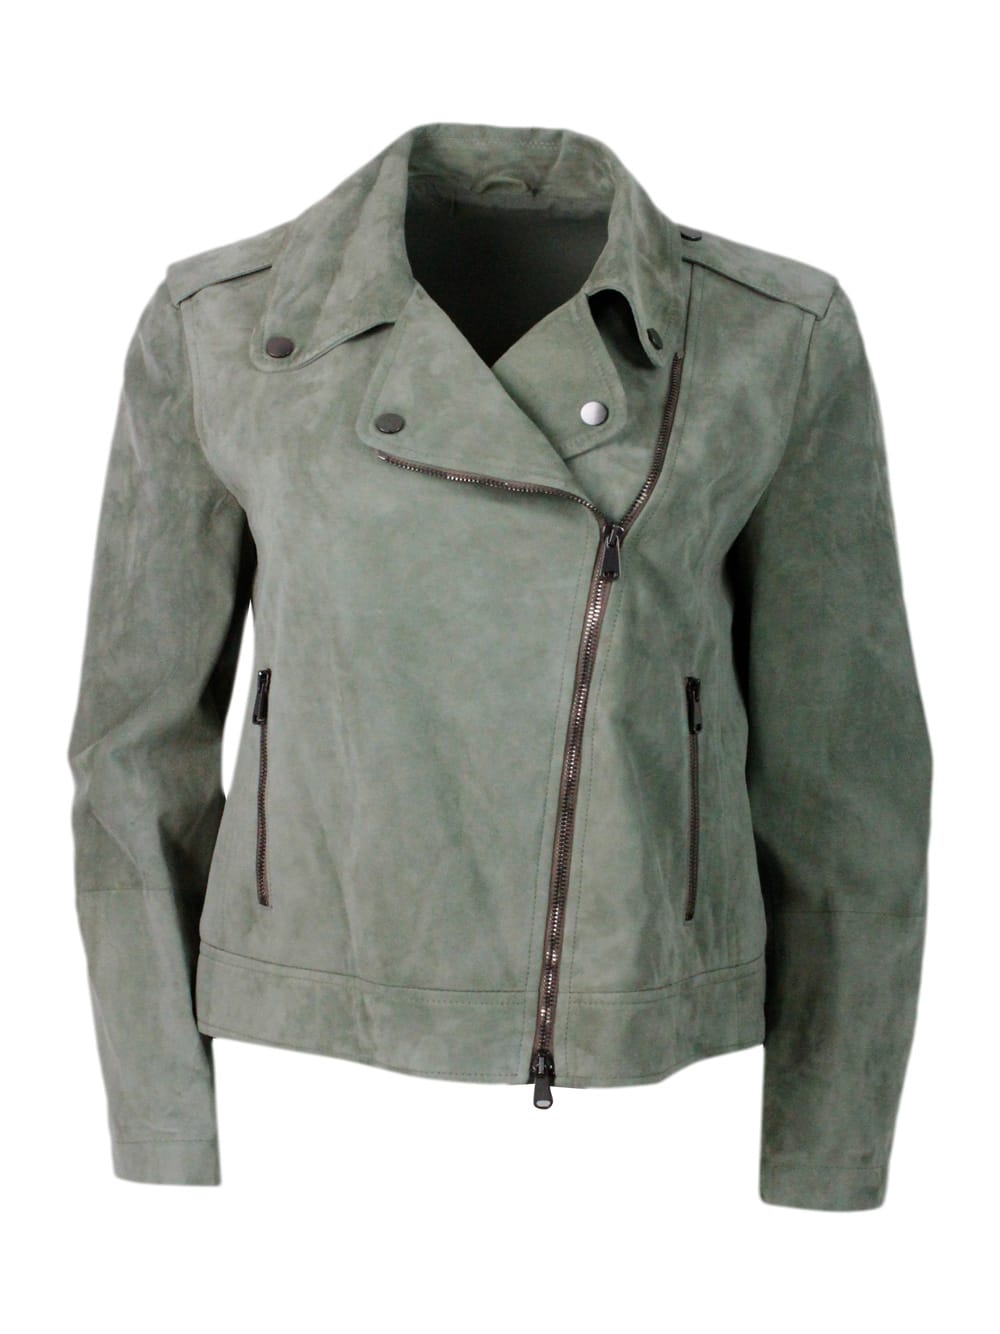 Biker Jacket In Precious And Soft Suede With Rows Of Brilliant Monili Behind The Neck